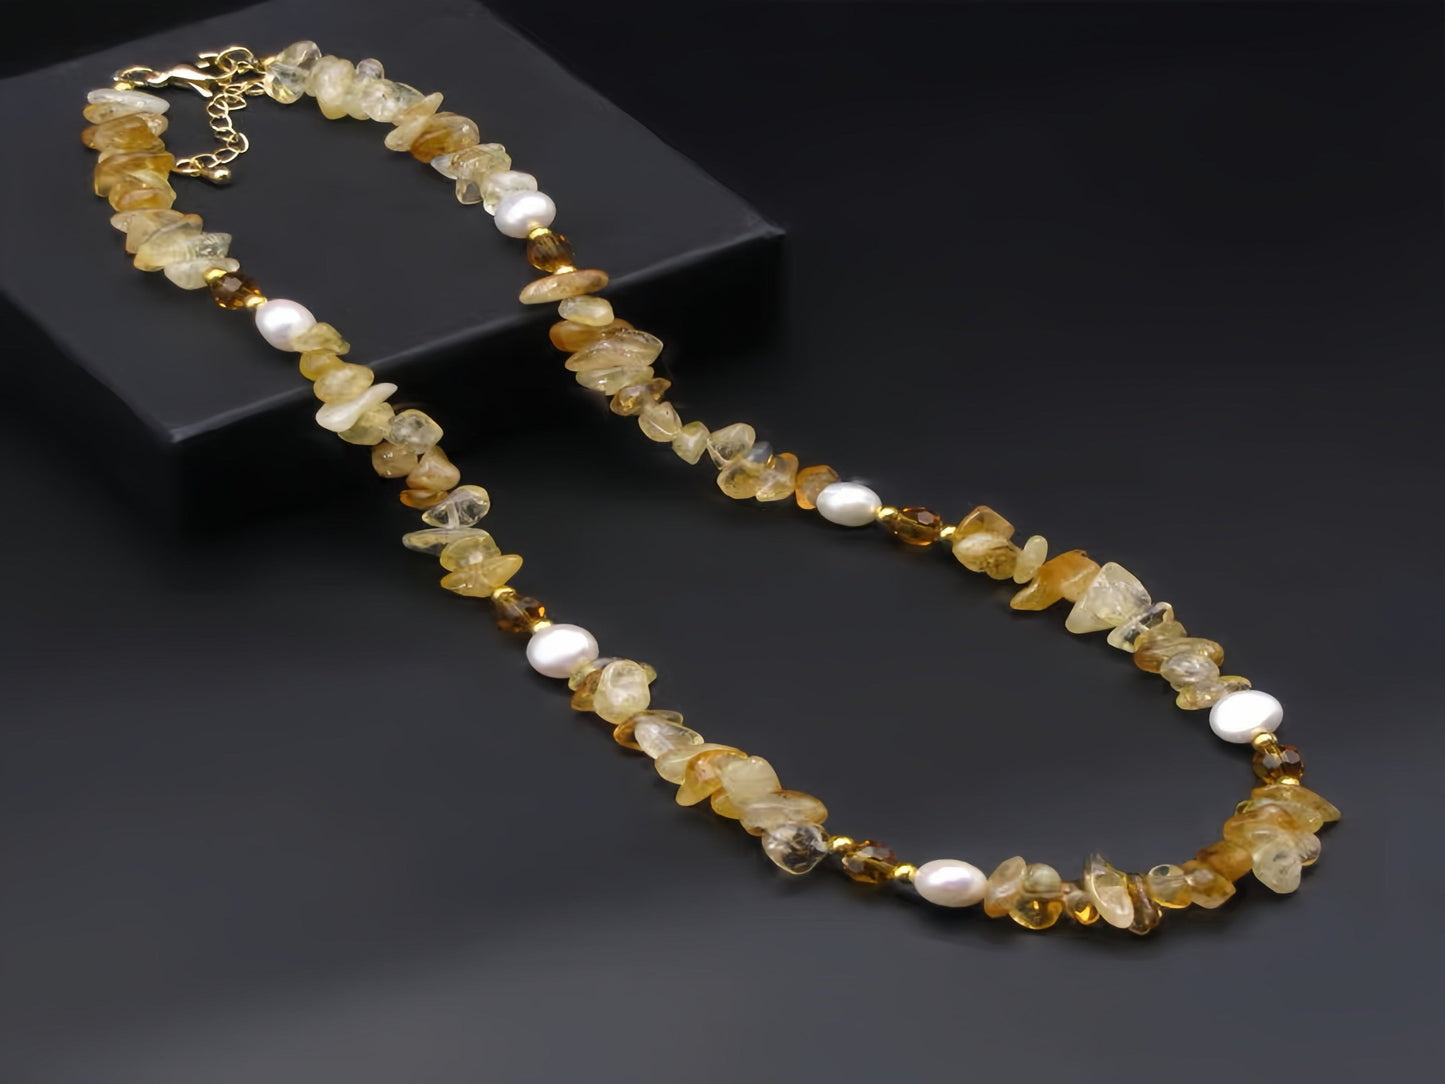 Natural Citrine with Pearl Necklaces from SHOPQAQ